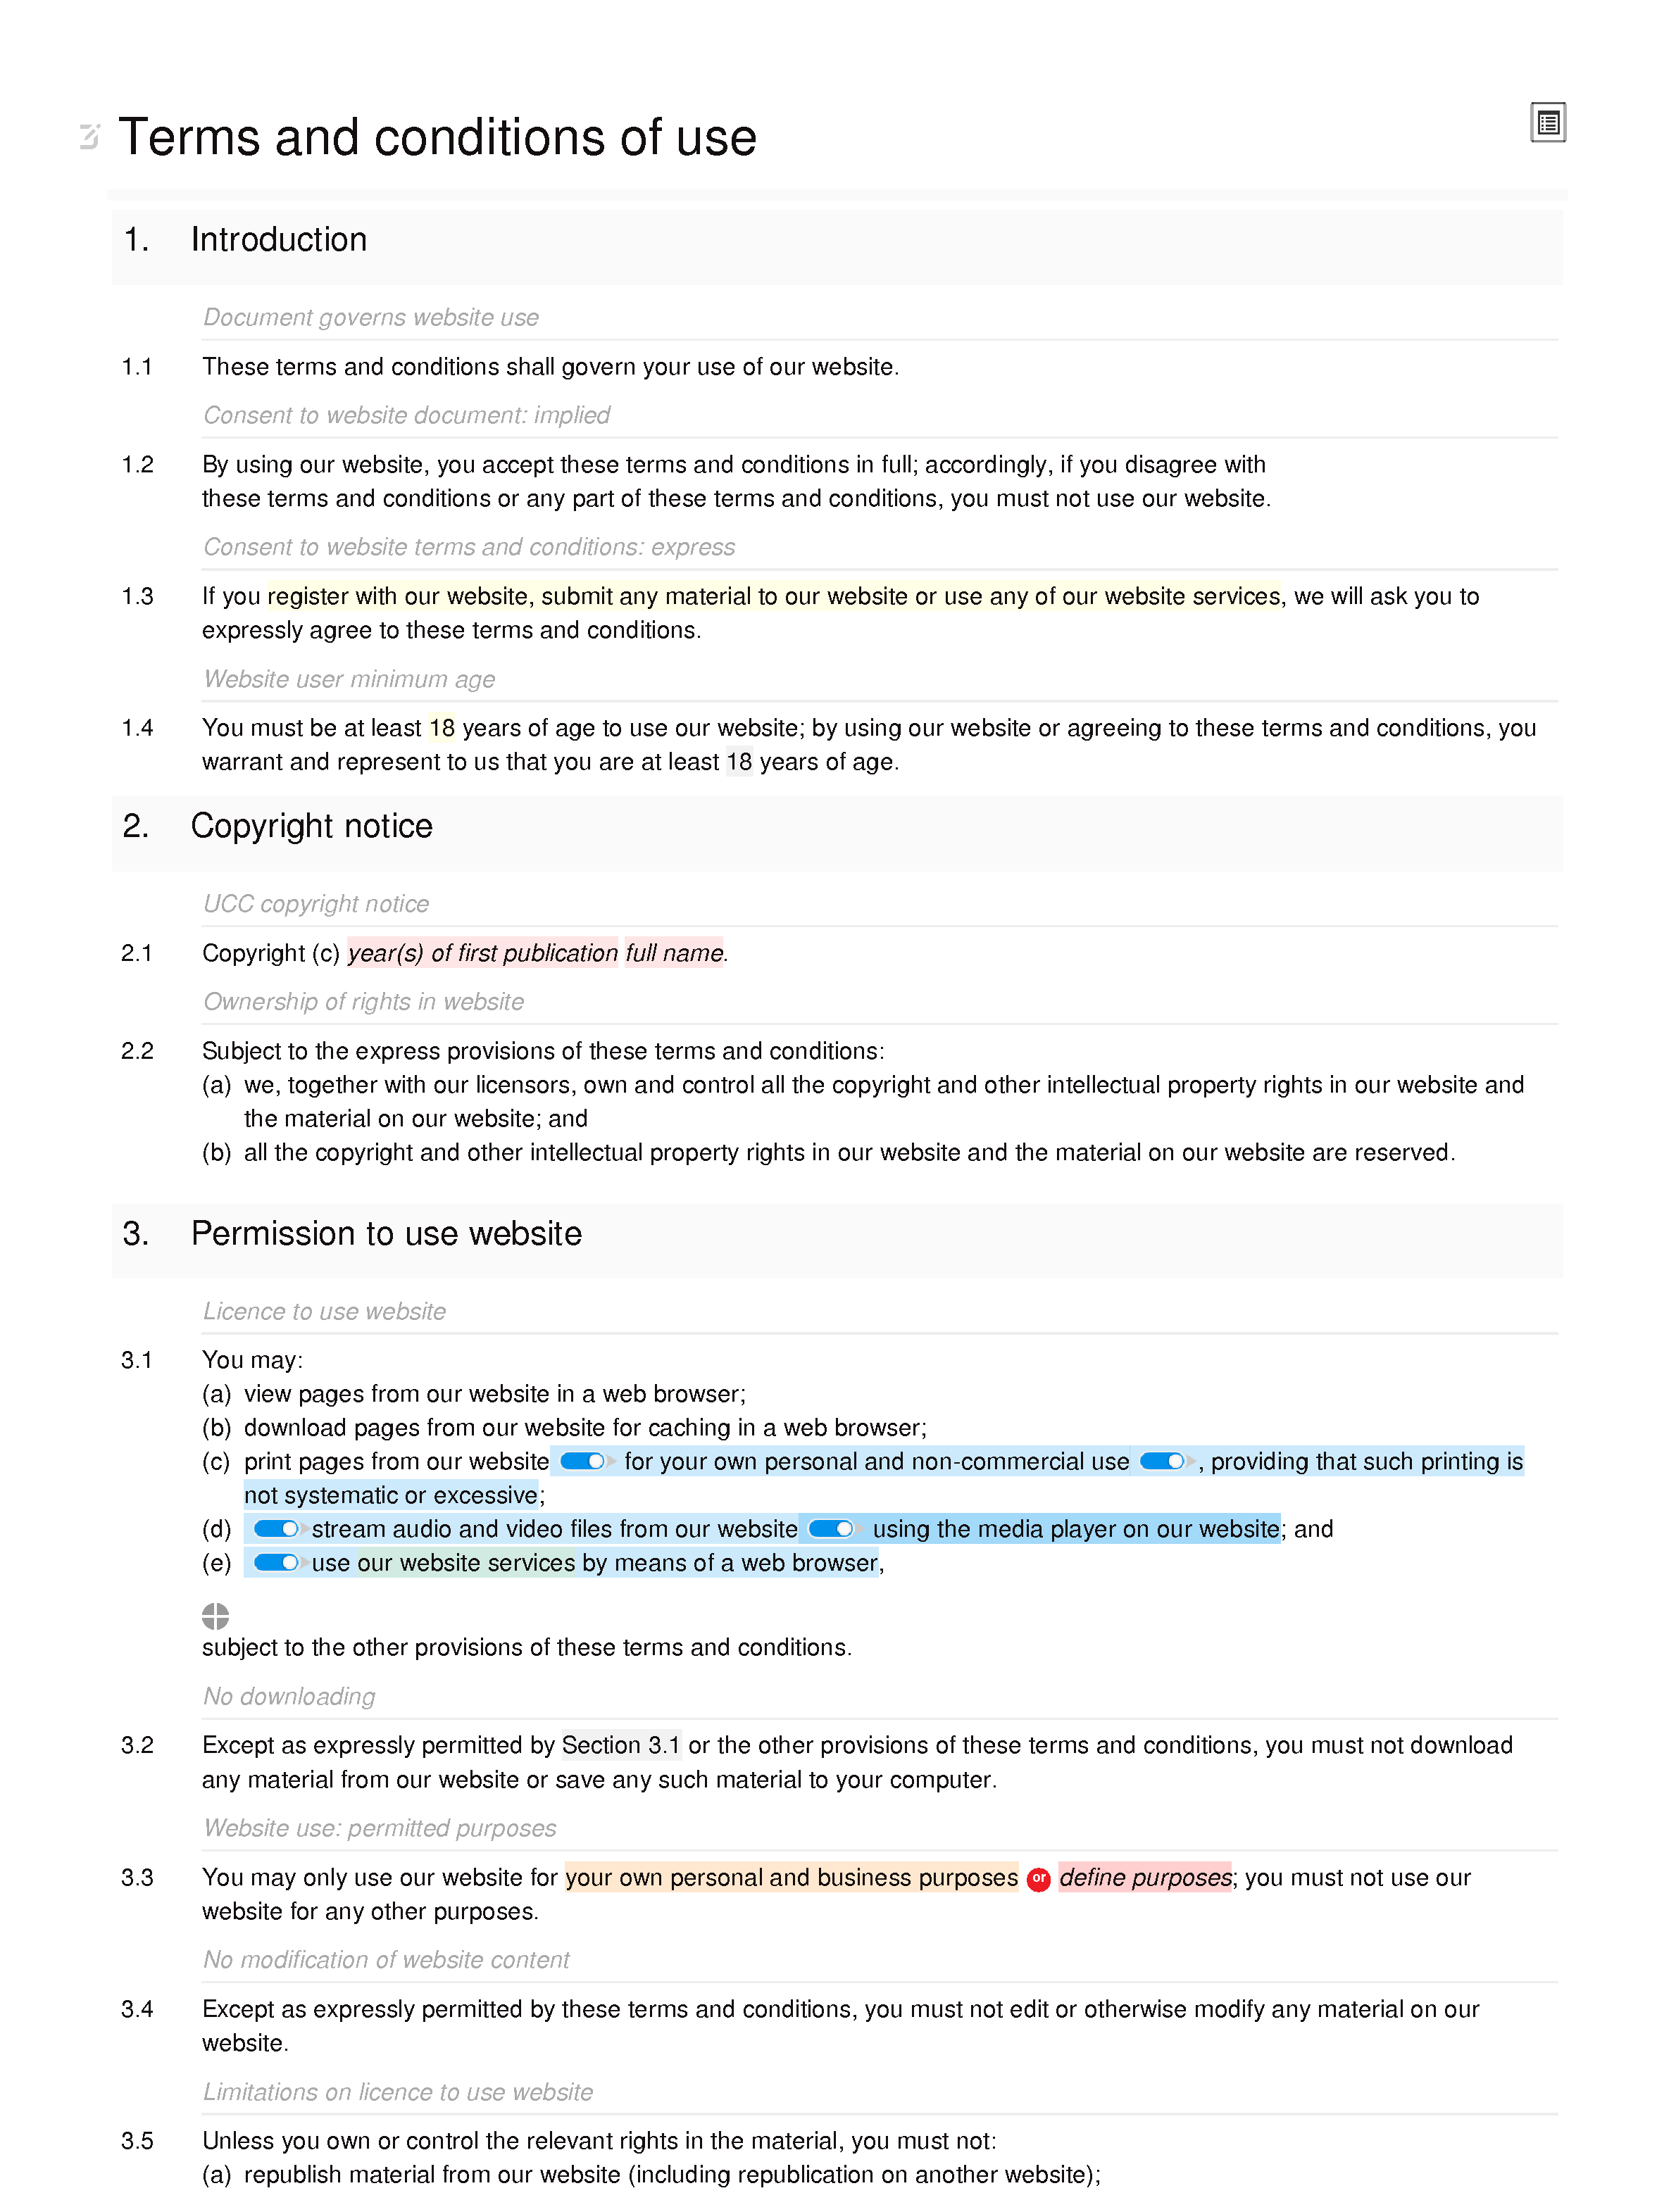 Legal website terms and conditions document editor preview